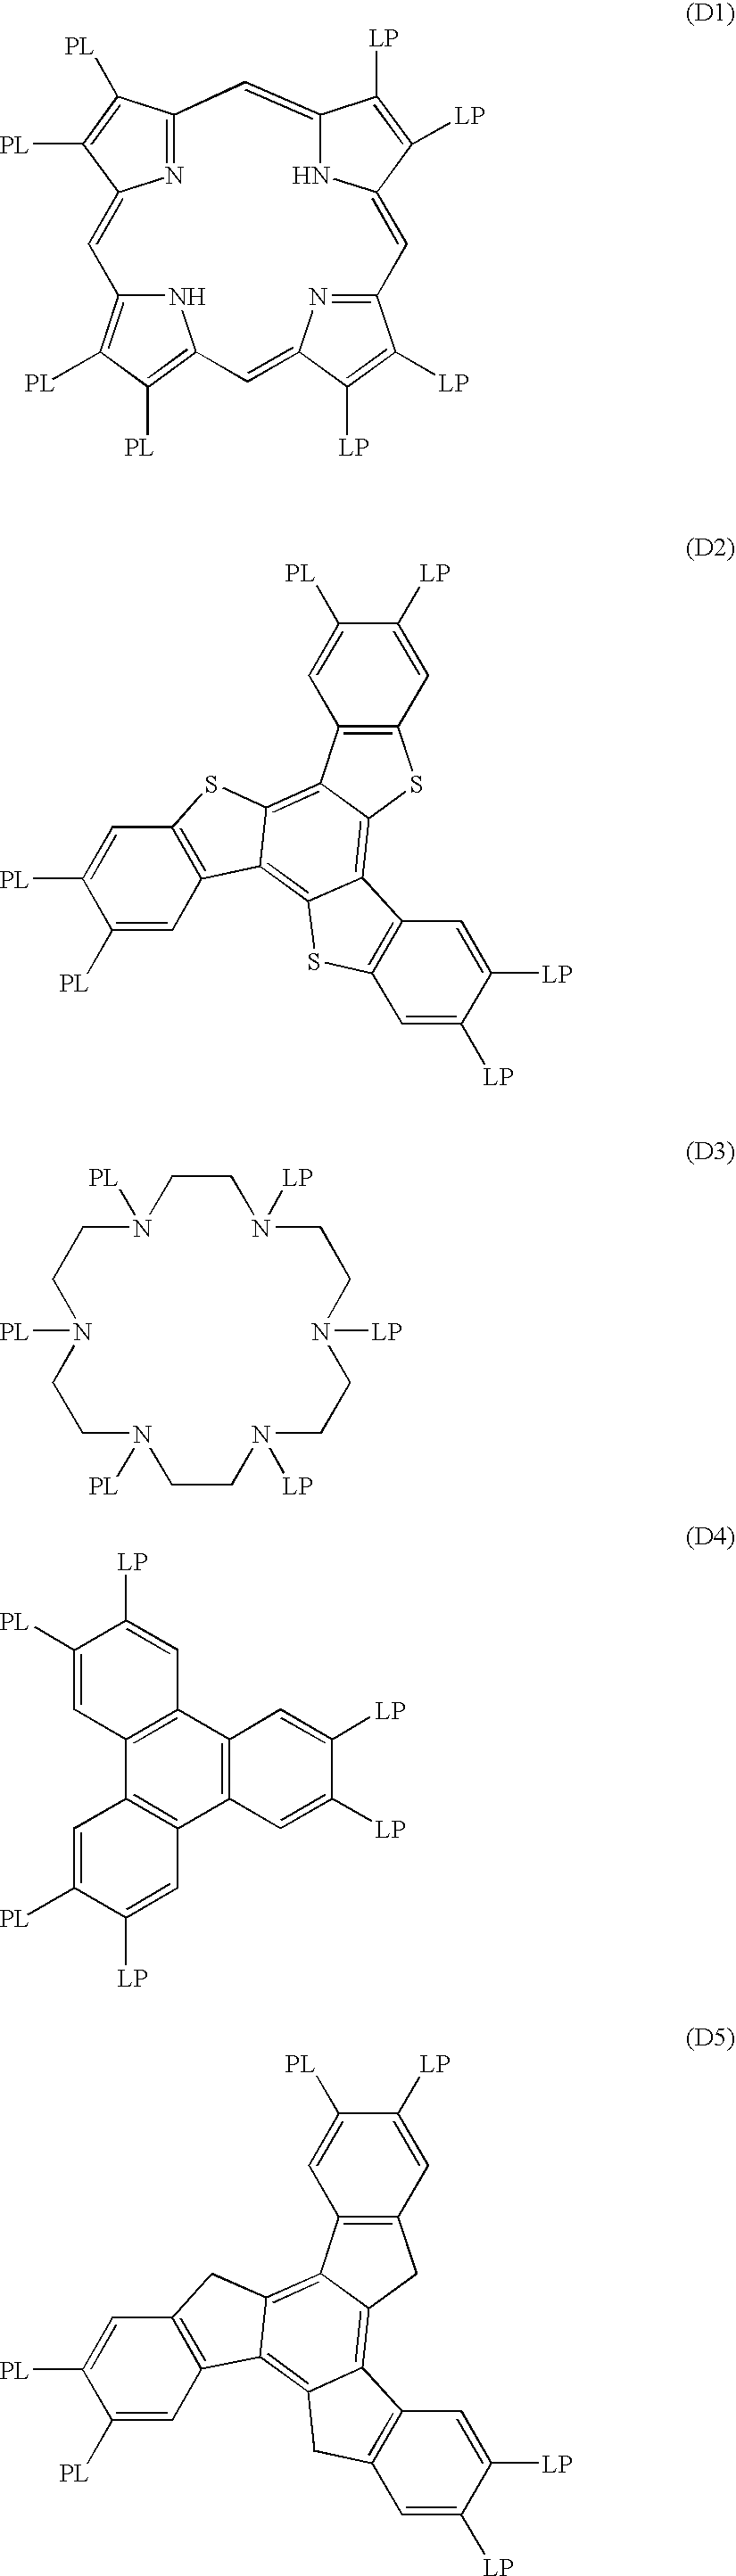 Optical compensating sheet having cellulose ester film, alignment film, and optically anisotropic layer comprising liquid-crystalline molecules with fixed alignment